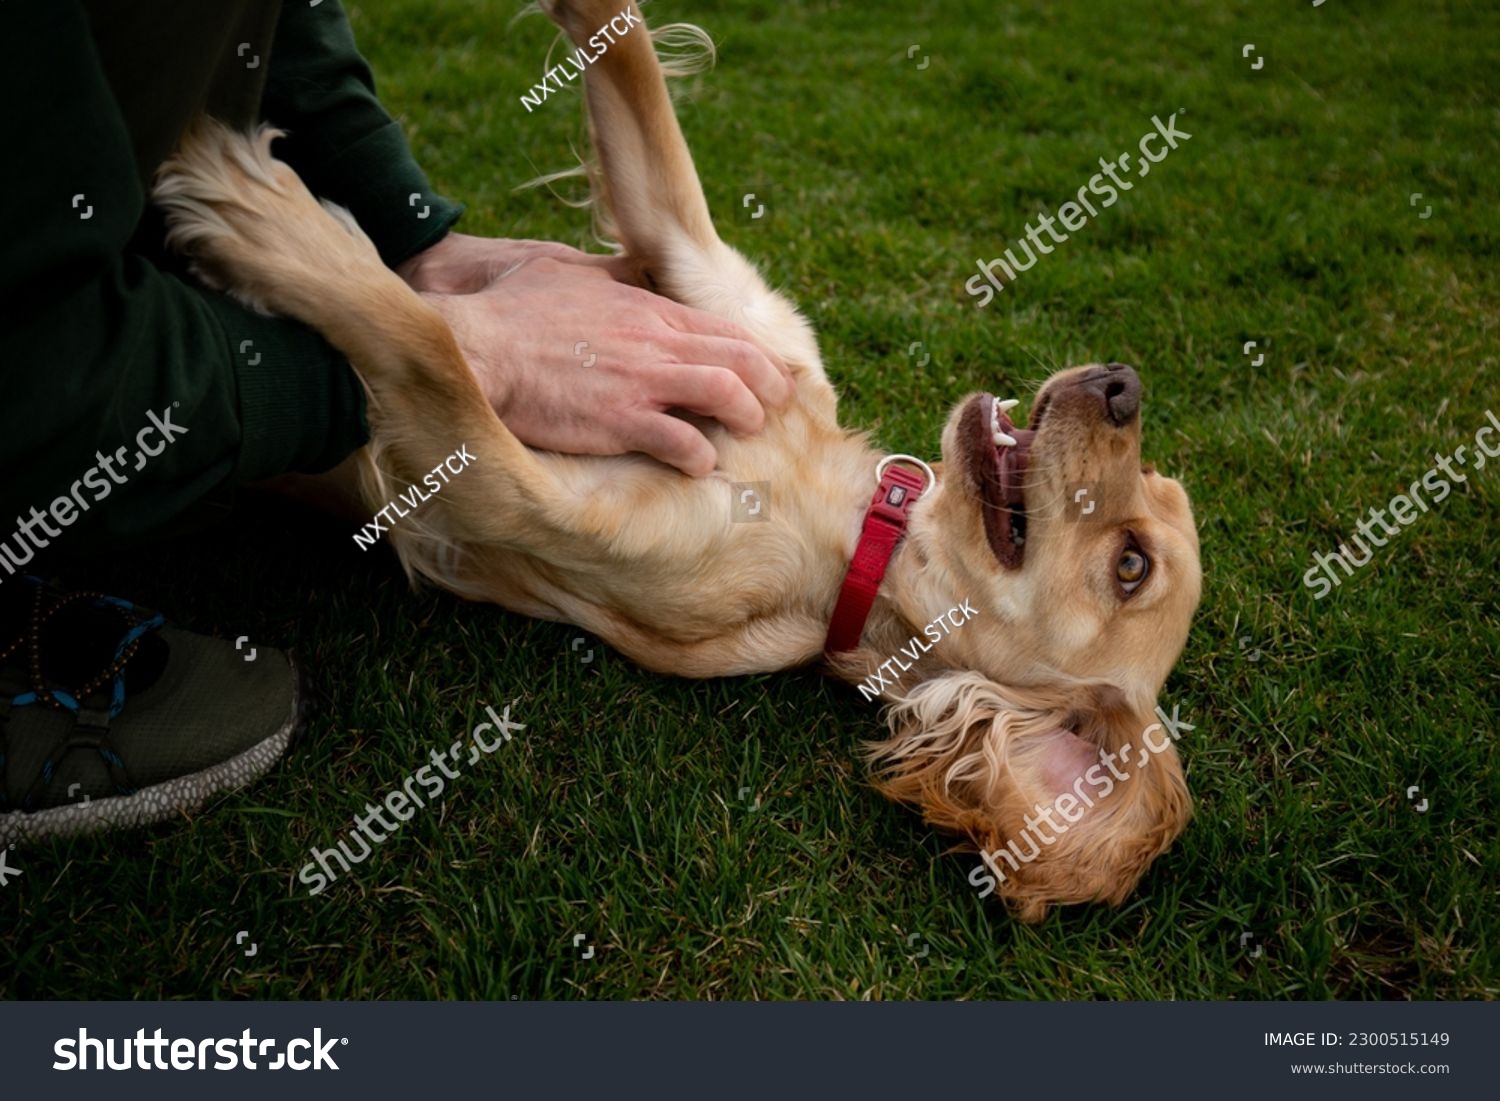 A happy cocker spaniel lies on the grass while its owner strokes its belly. A red collared cocker spaniel receives belly strokes from its owner. #2300515149